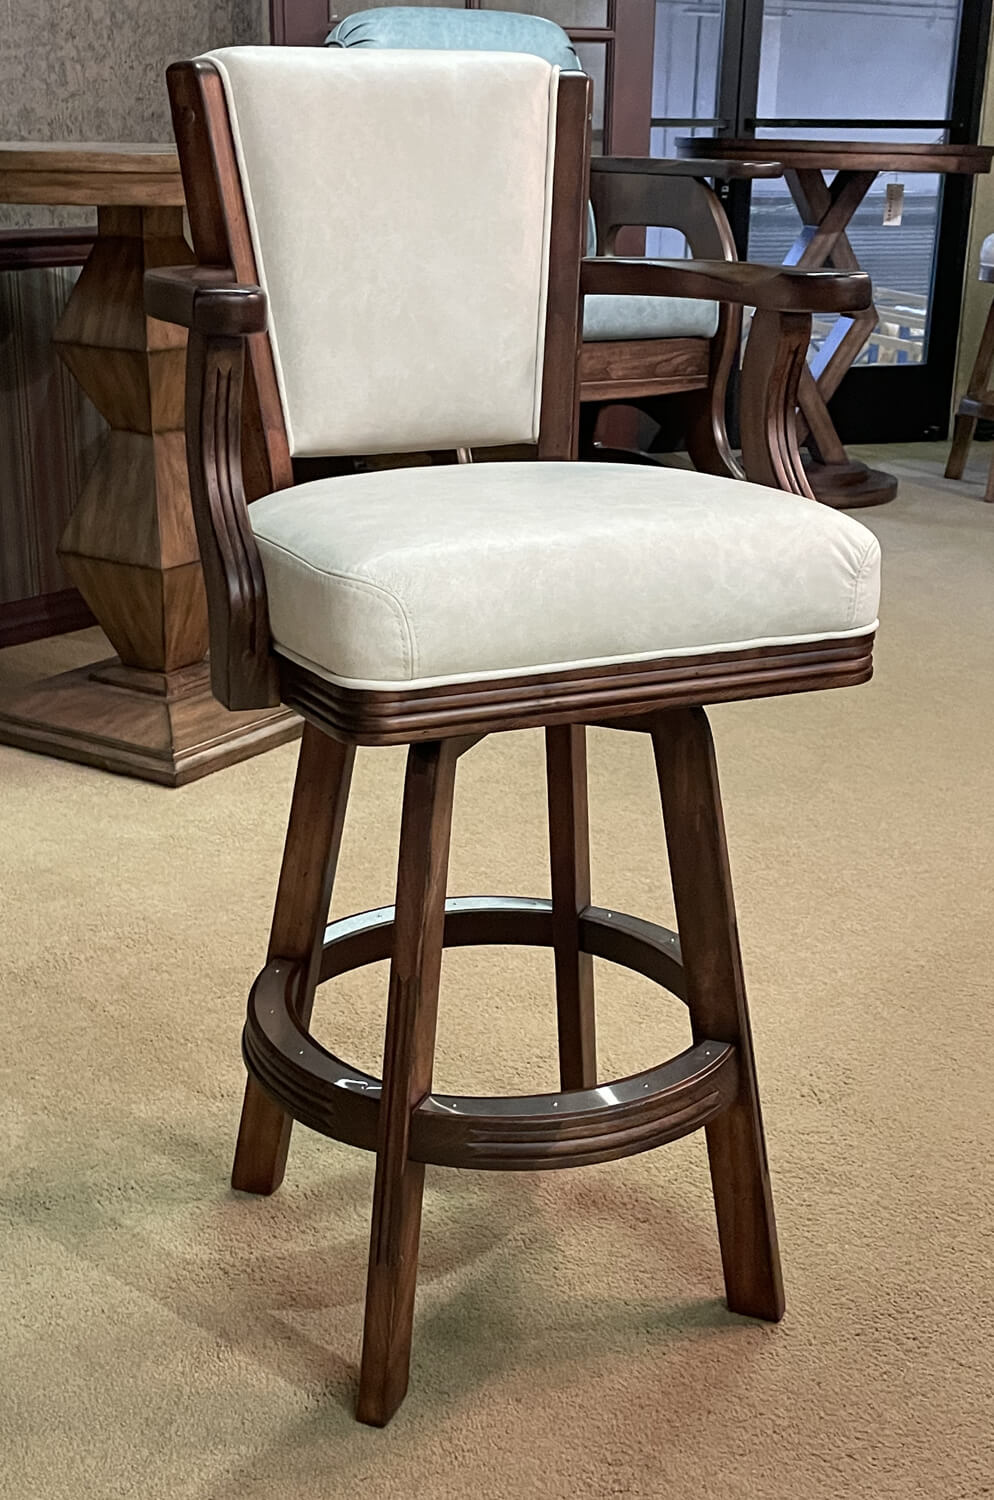 960 Maple Upholstered Swivel Stool with Arms